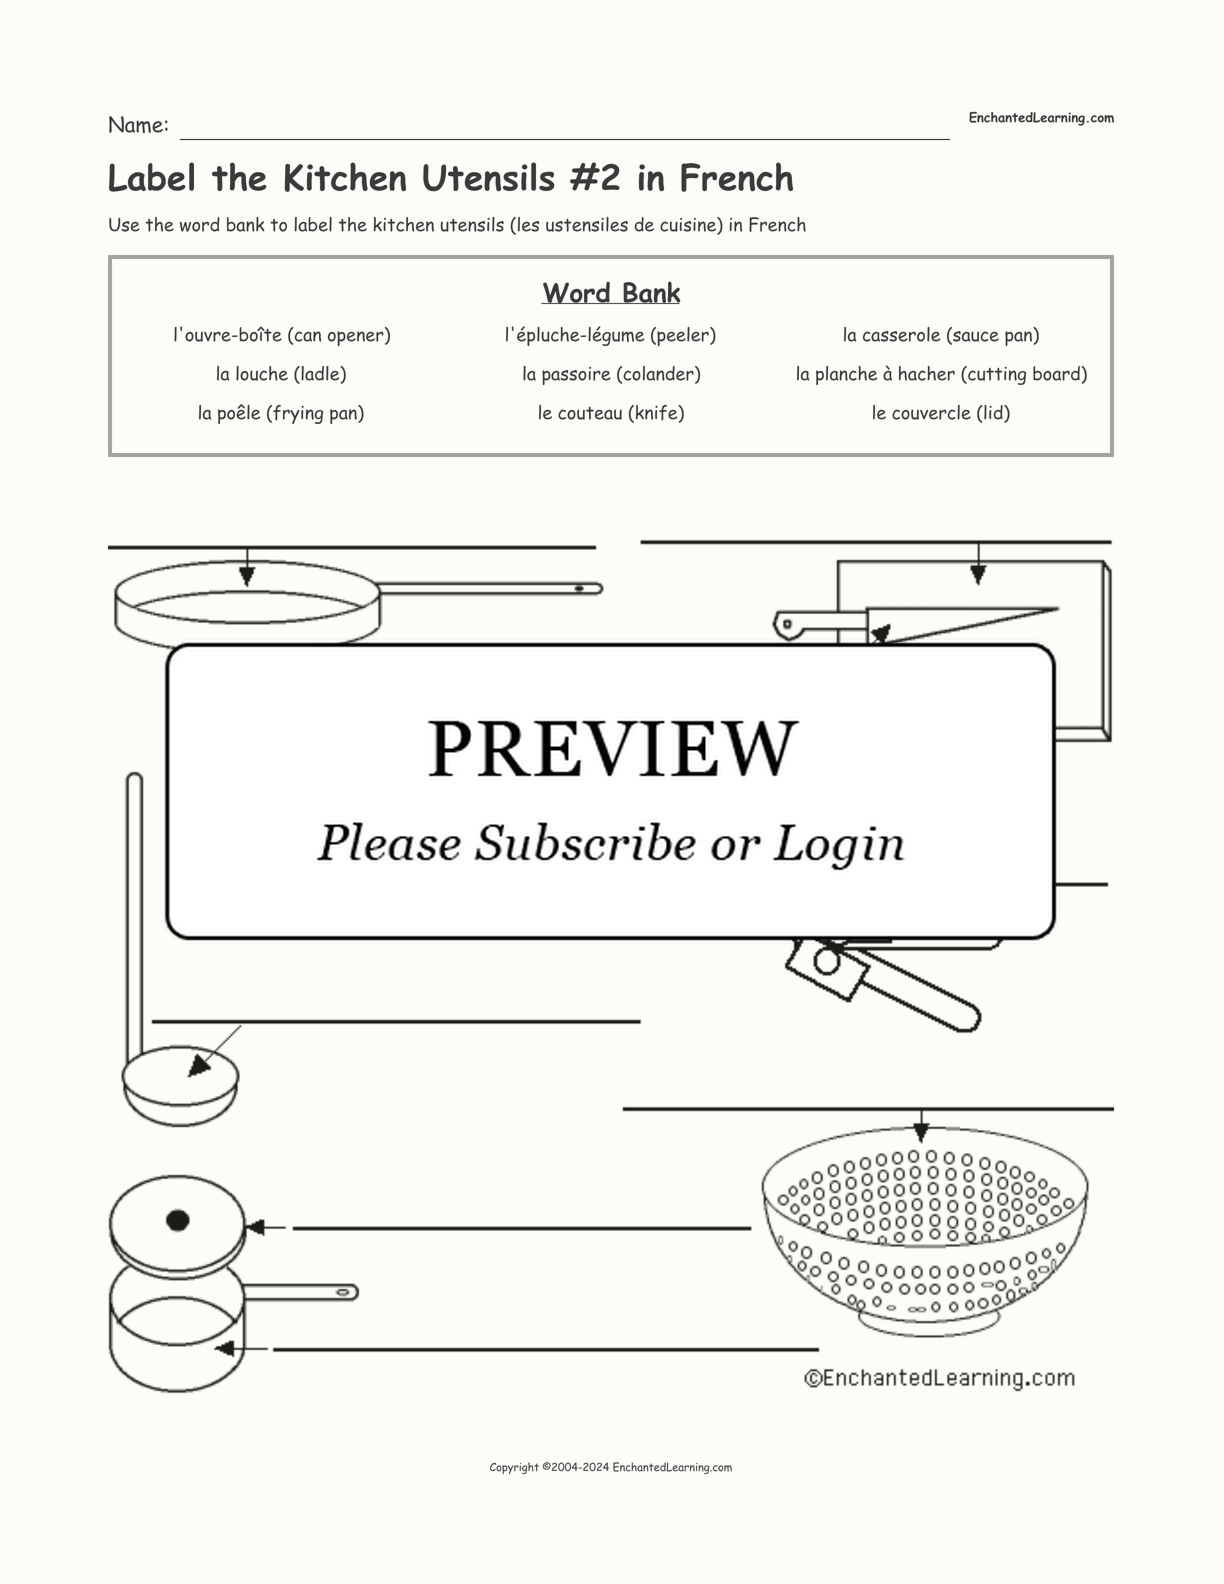 Label the Kitchen Utensils #2 in French interactive worksheet page 1